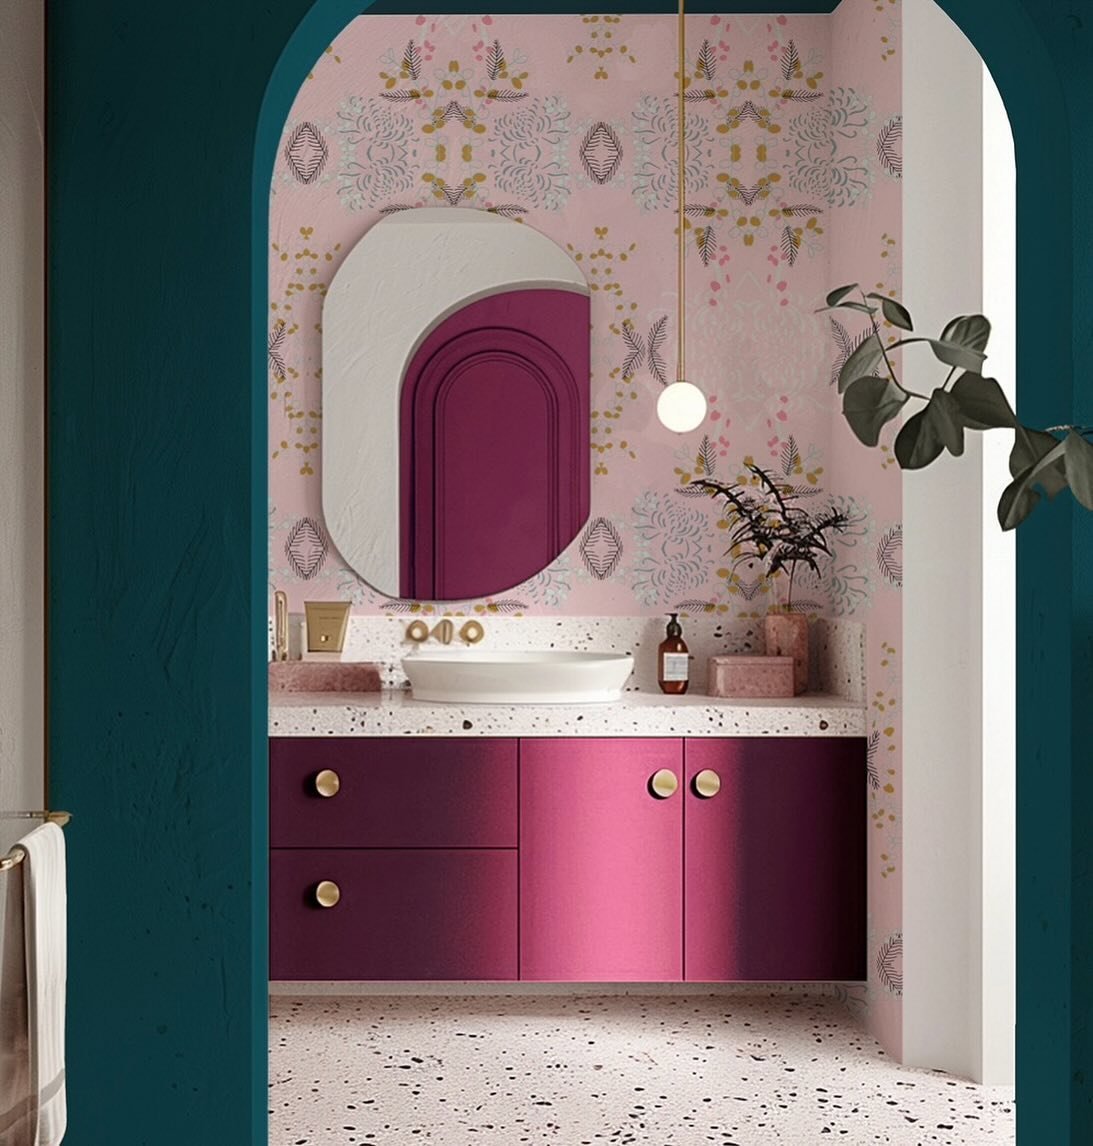 Pastelly pink, ochre and pale blue paired with bold striking colours! Love how these just interlace so magnificently.

Colour can be so transformative! 

.
.
.
.
.
.

#colourlovers #patternlover #bathroomdesign #wallpaperdesign #bathroomgoals #modern